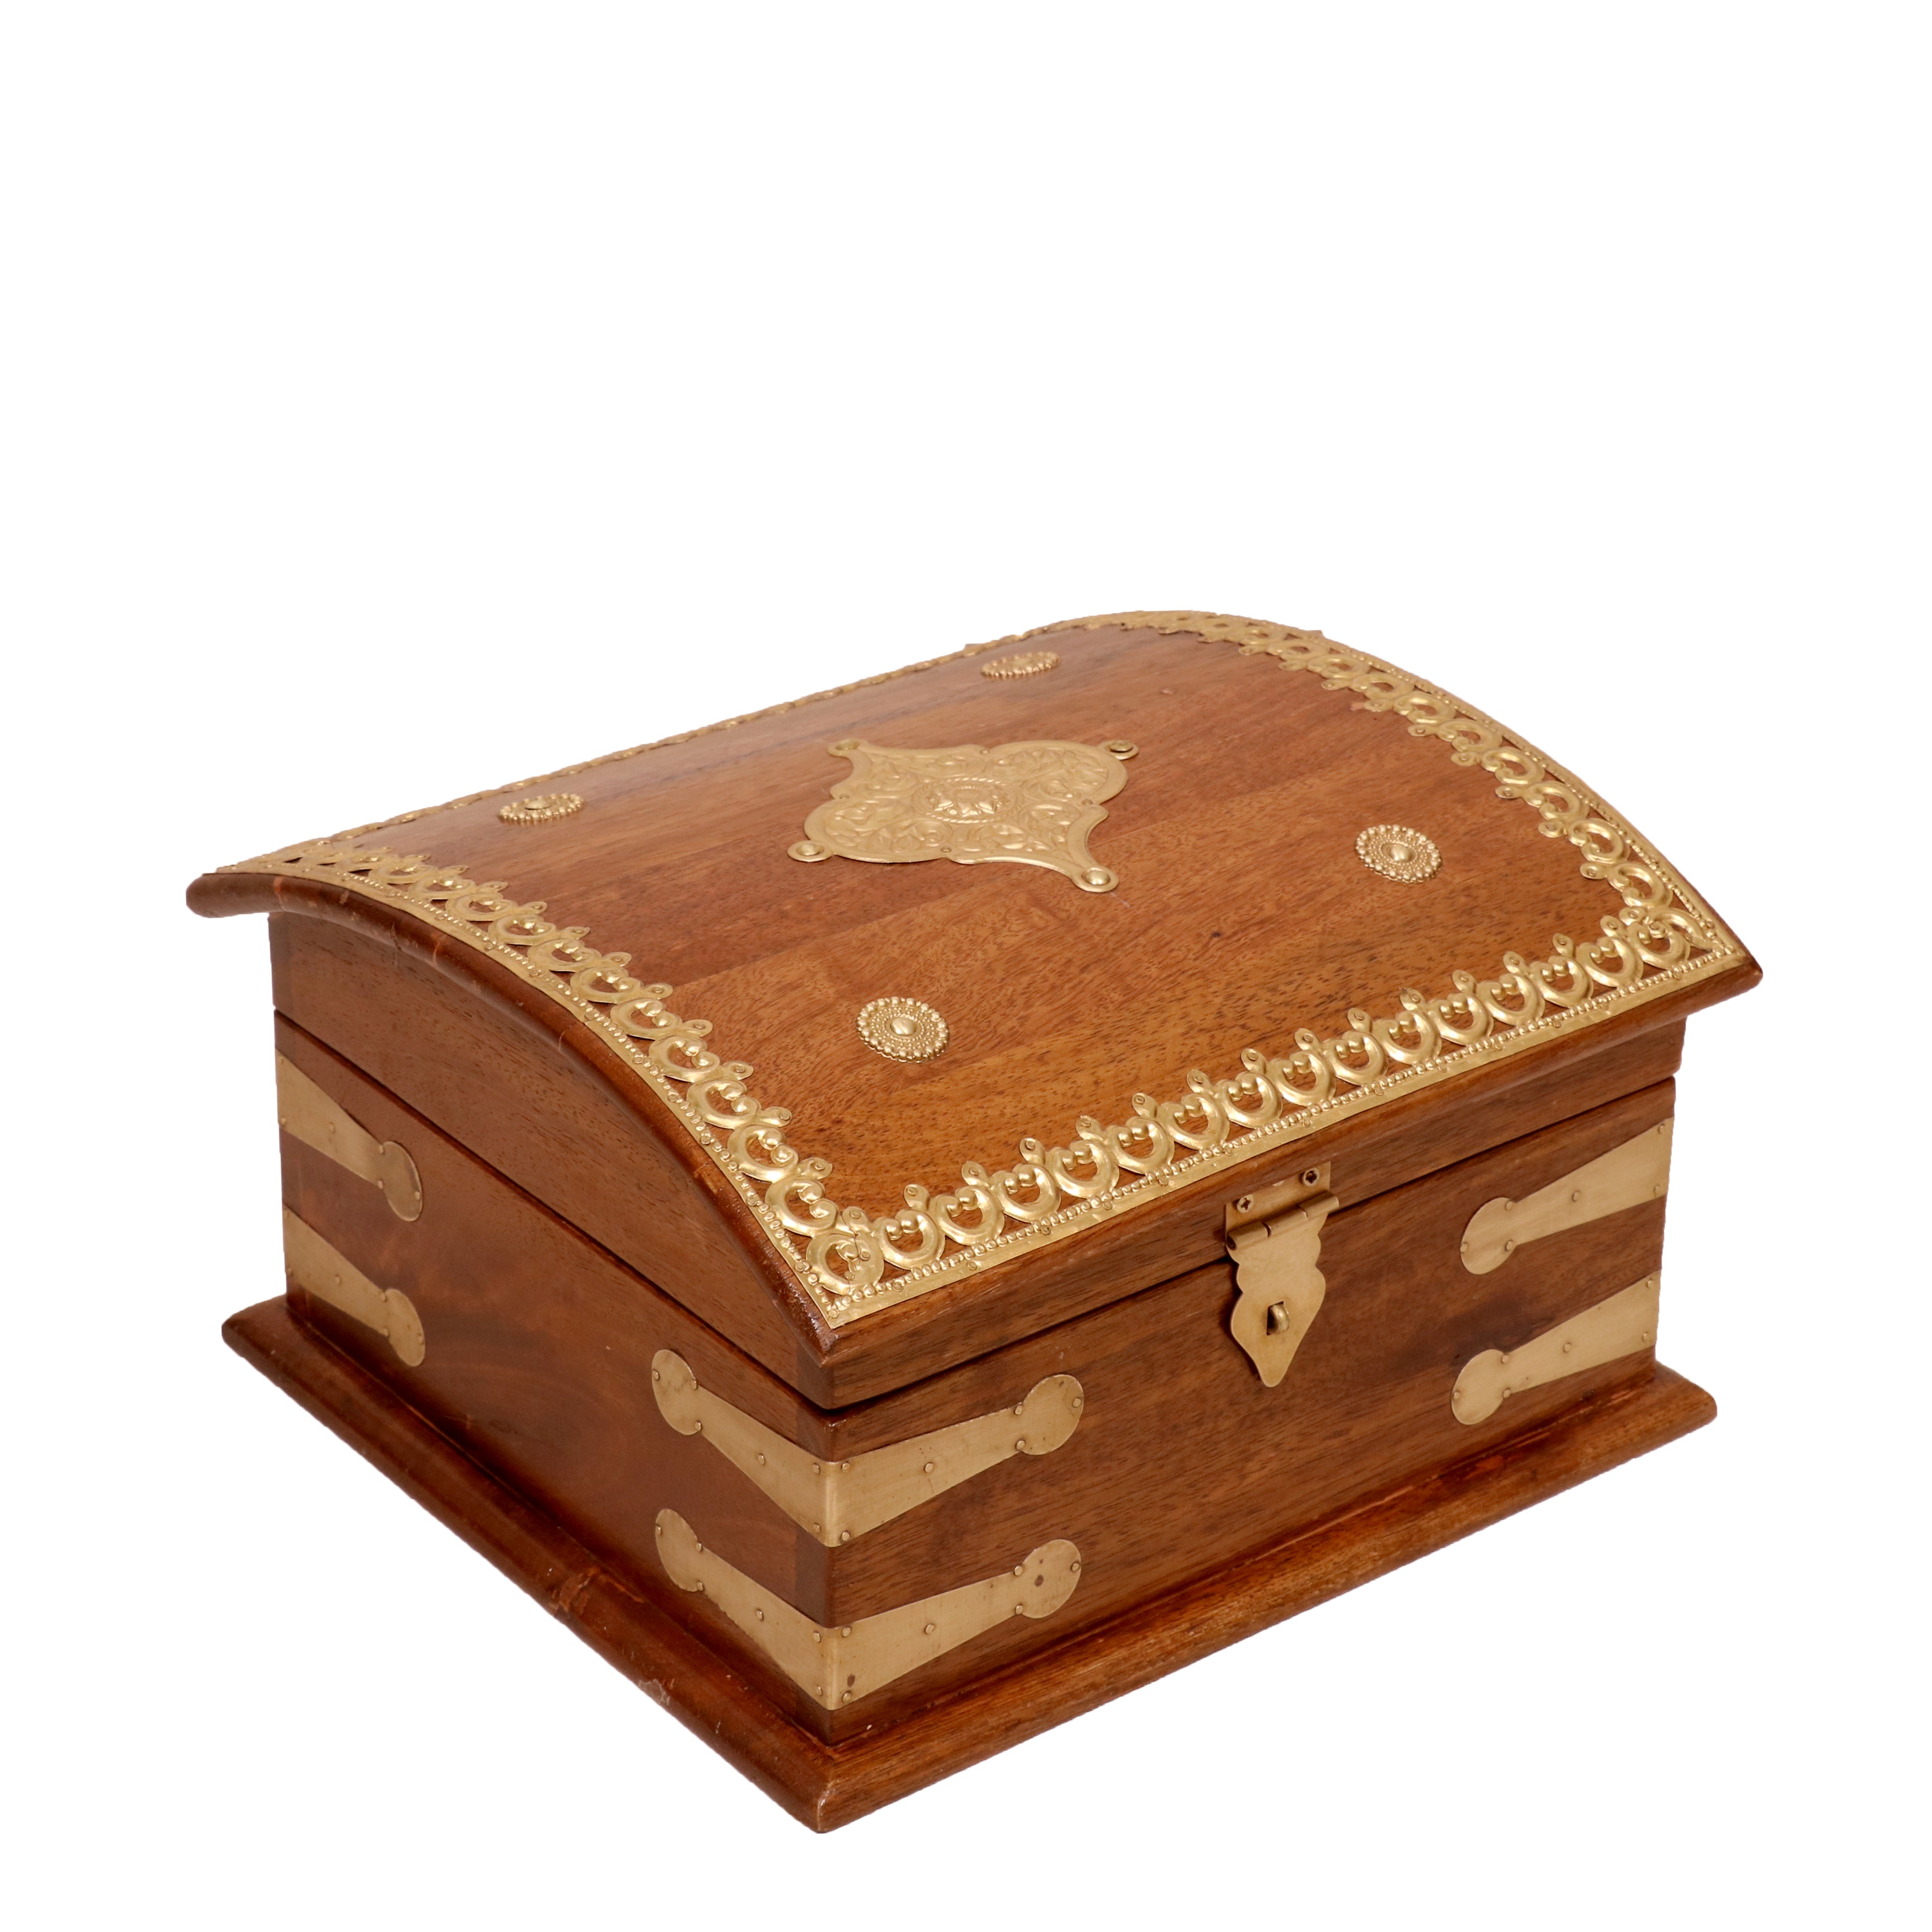 Wooden Curved Boxes Wooden Box